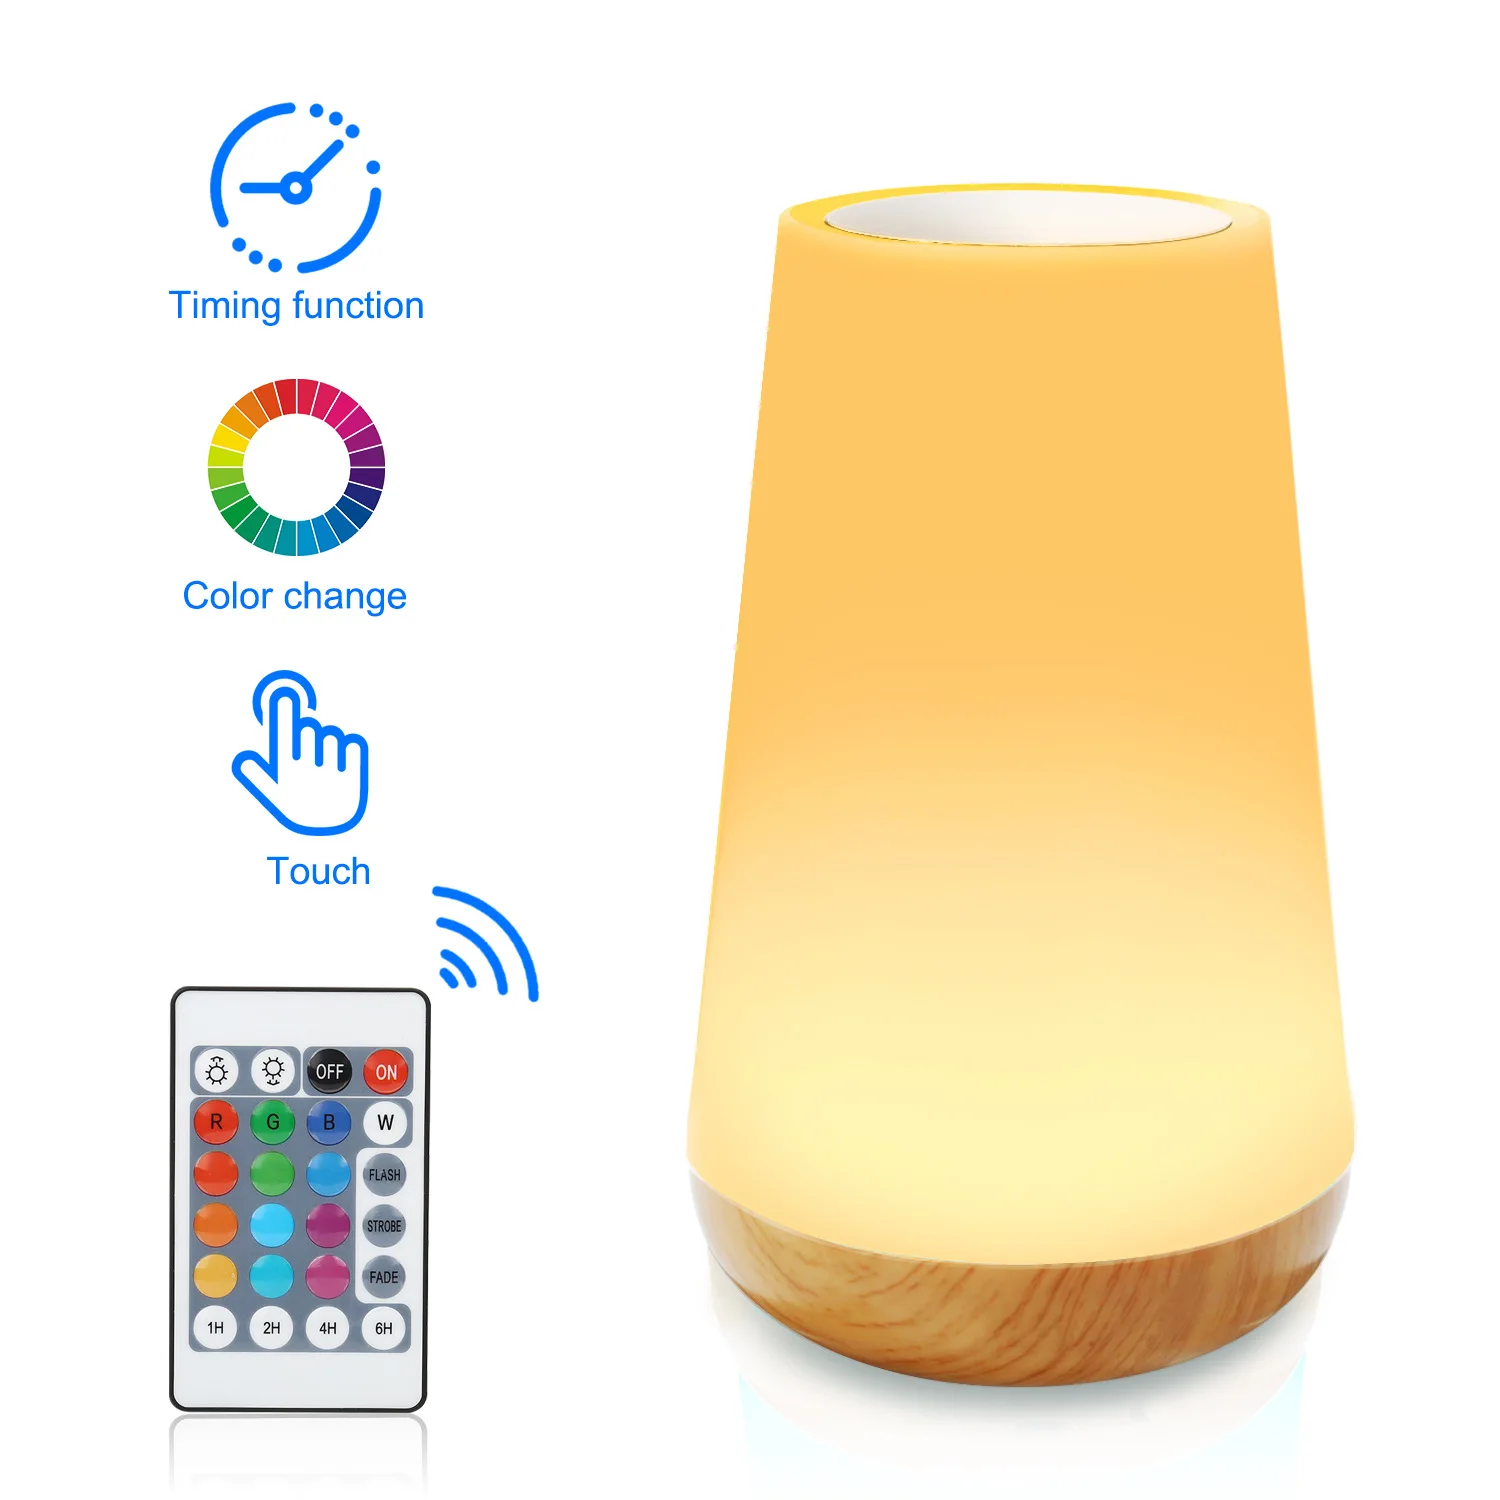 

Wooden grain remote control touch small night light creative clapping table light bedroom bedside light colorful atmospherelight